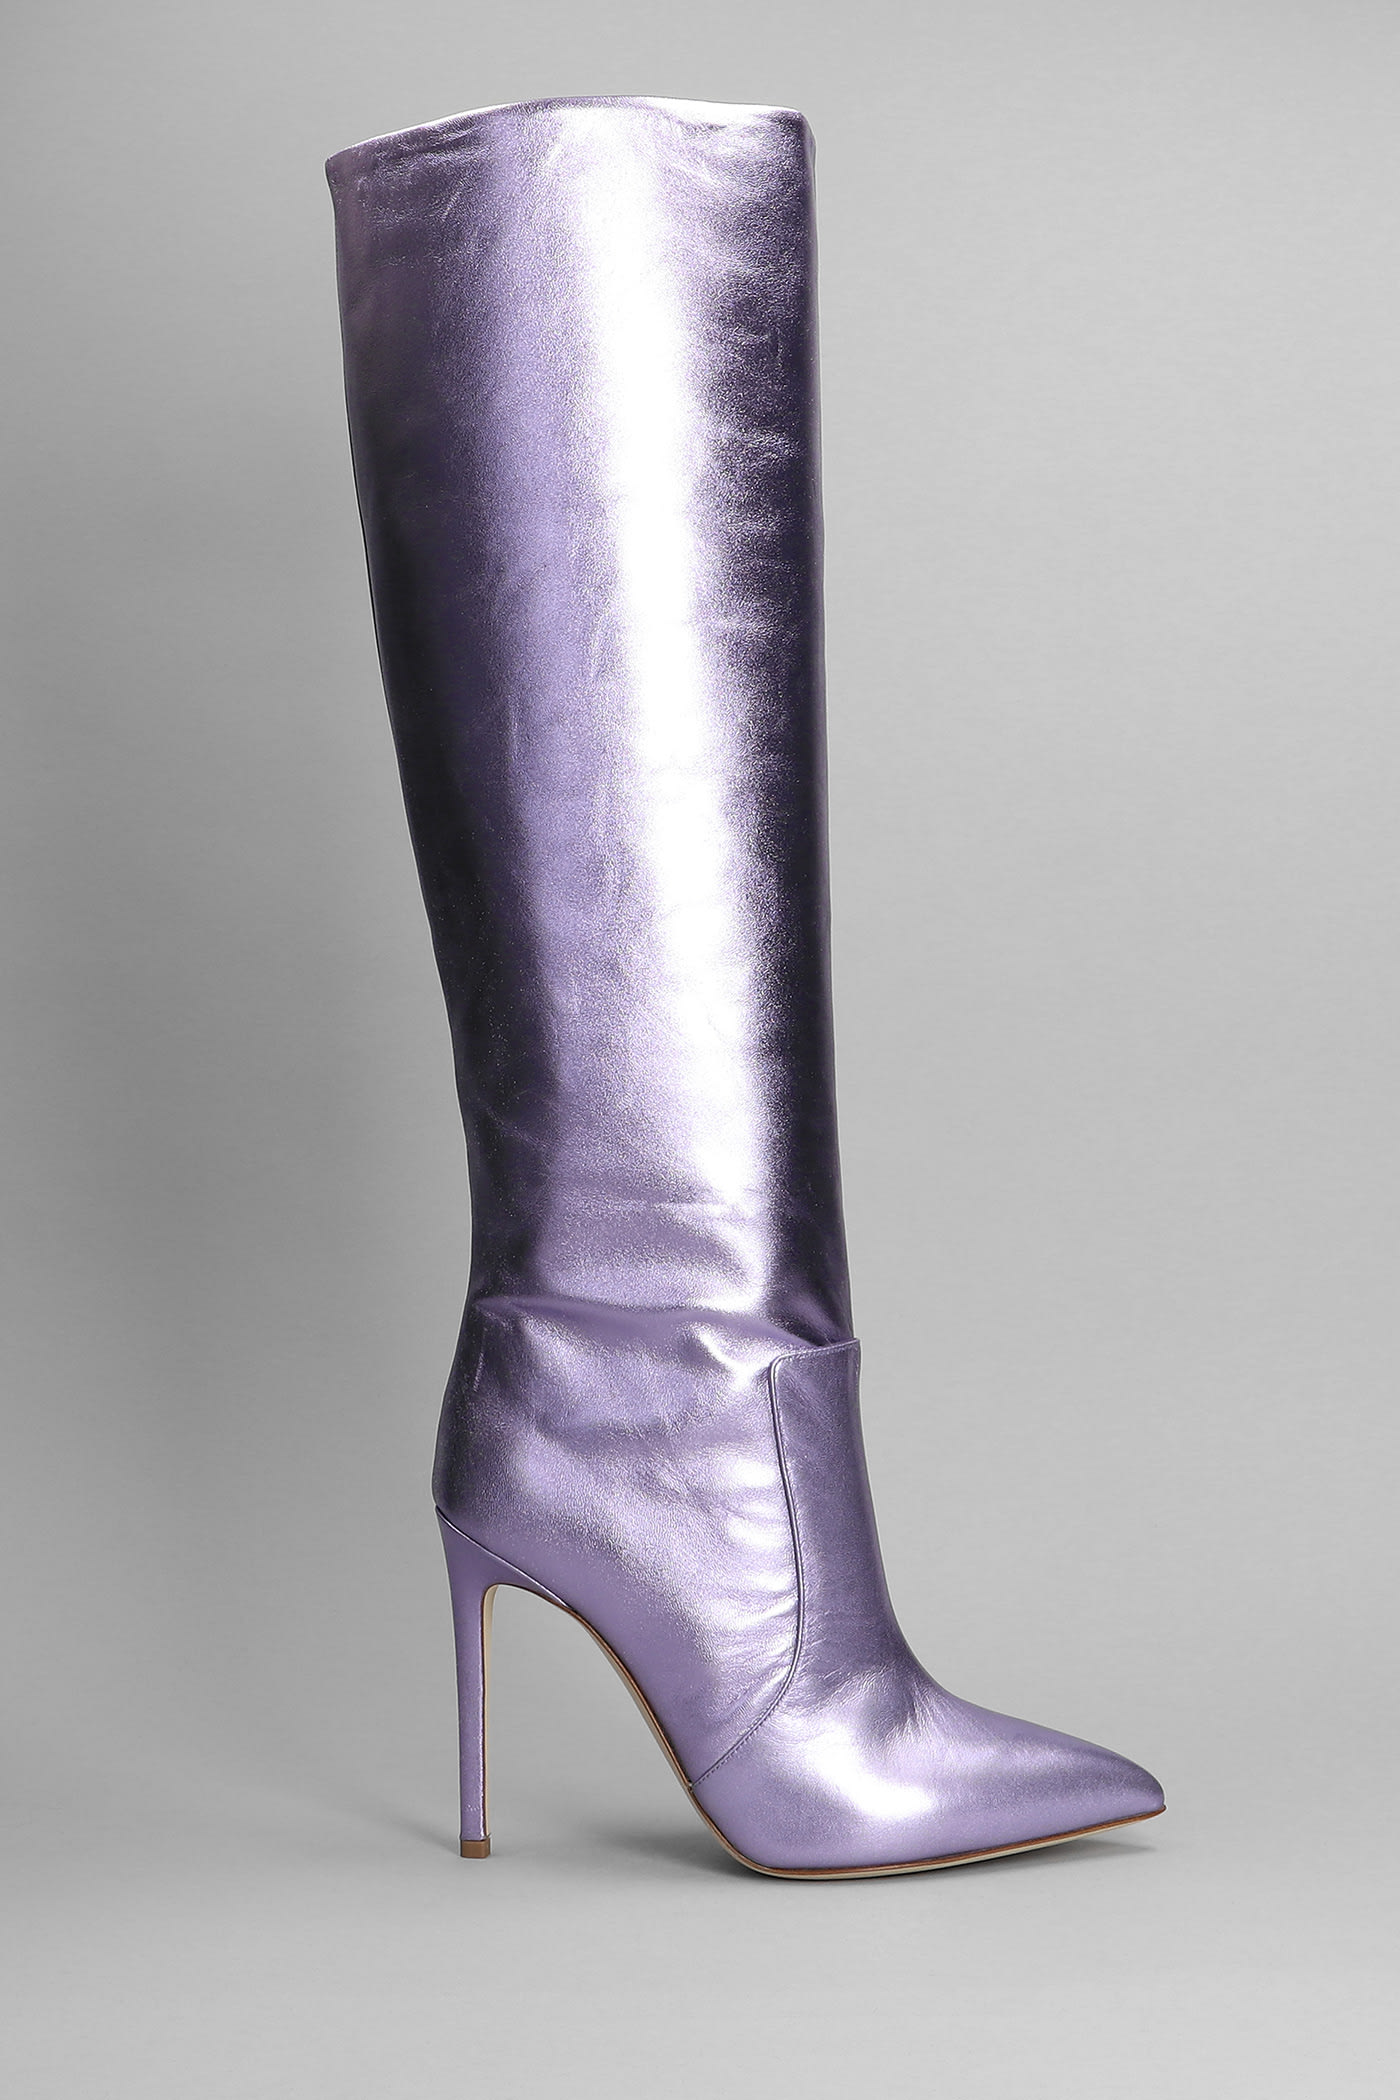 PARIS TEXAS HIGH HEELS BOOTS IN VIOLA LEATHER